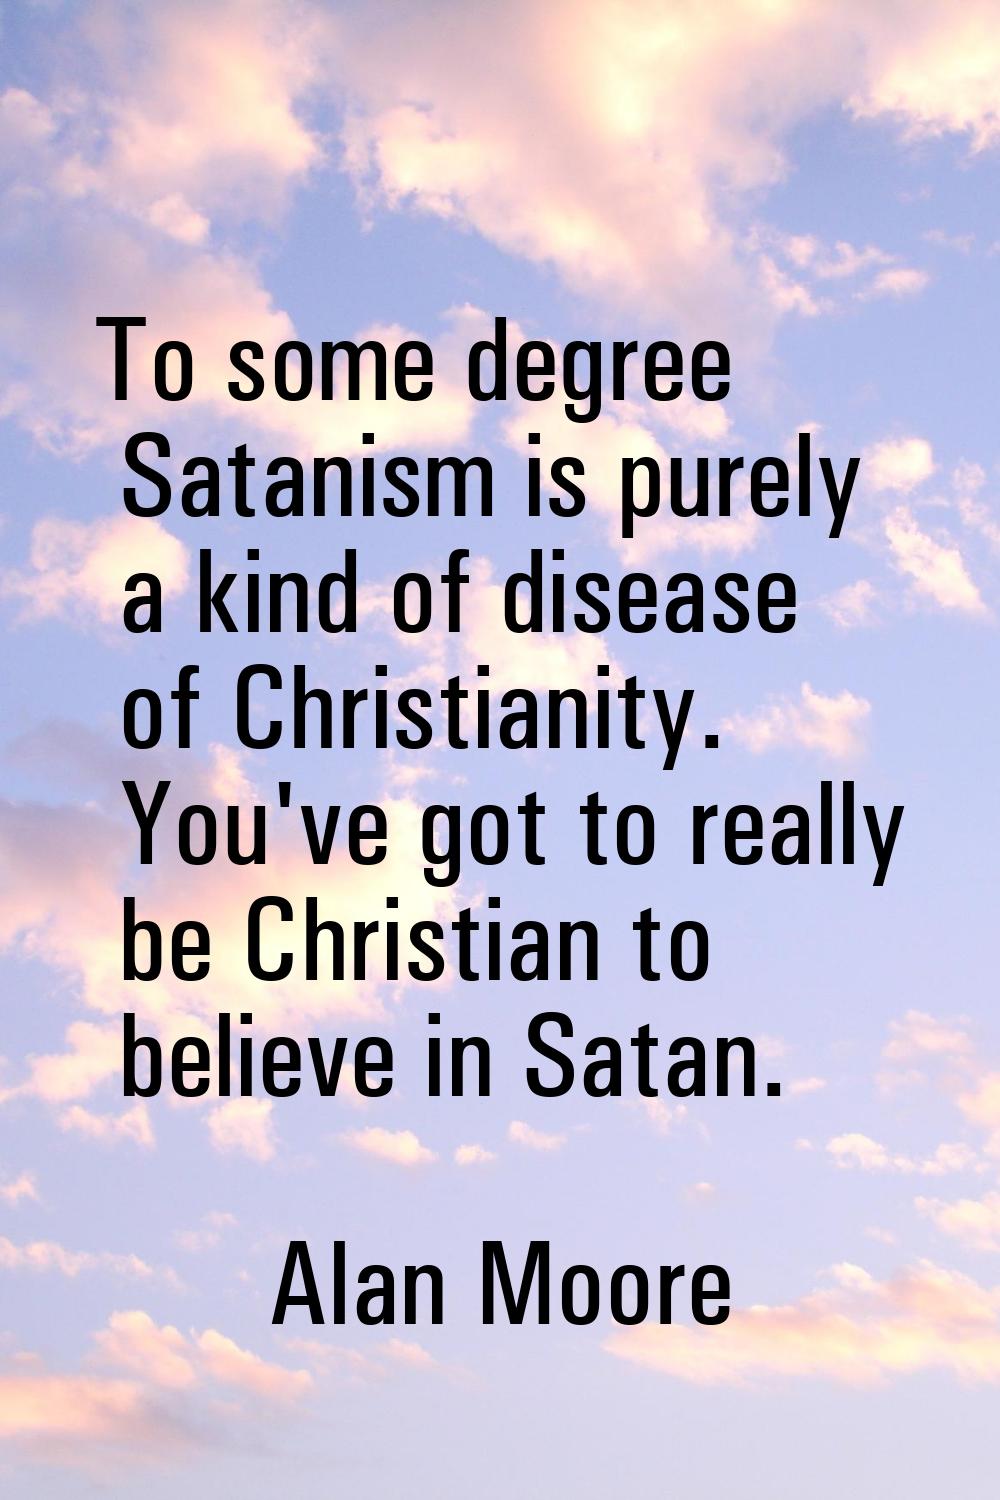 To some degree Satanism is purely a kind of disease of Christianity. You've got to really be Christ